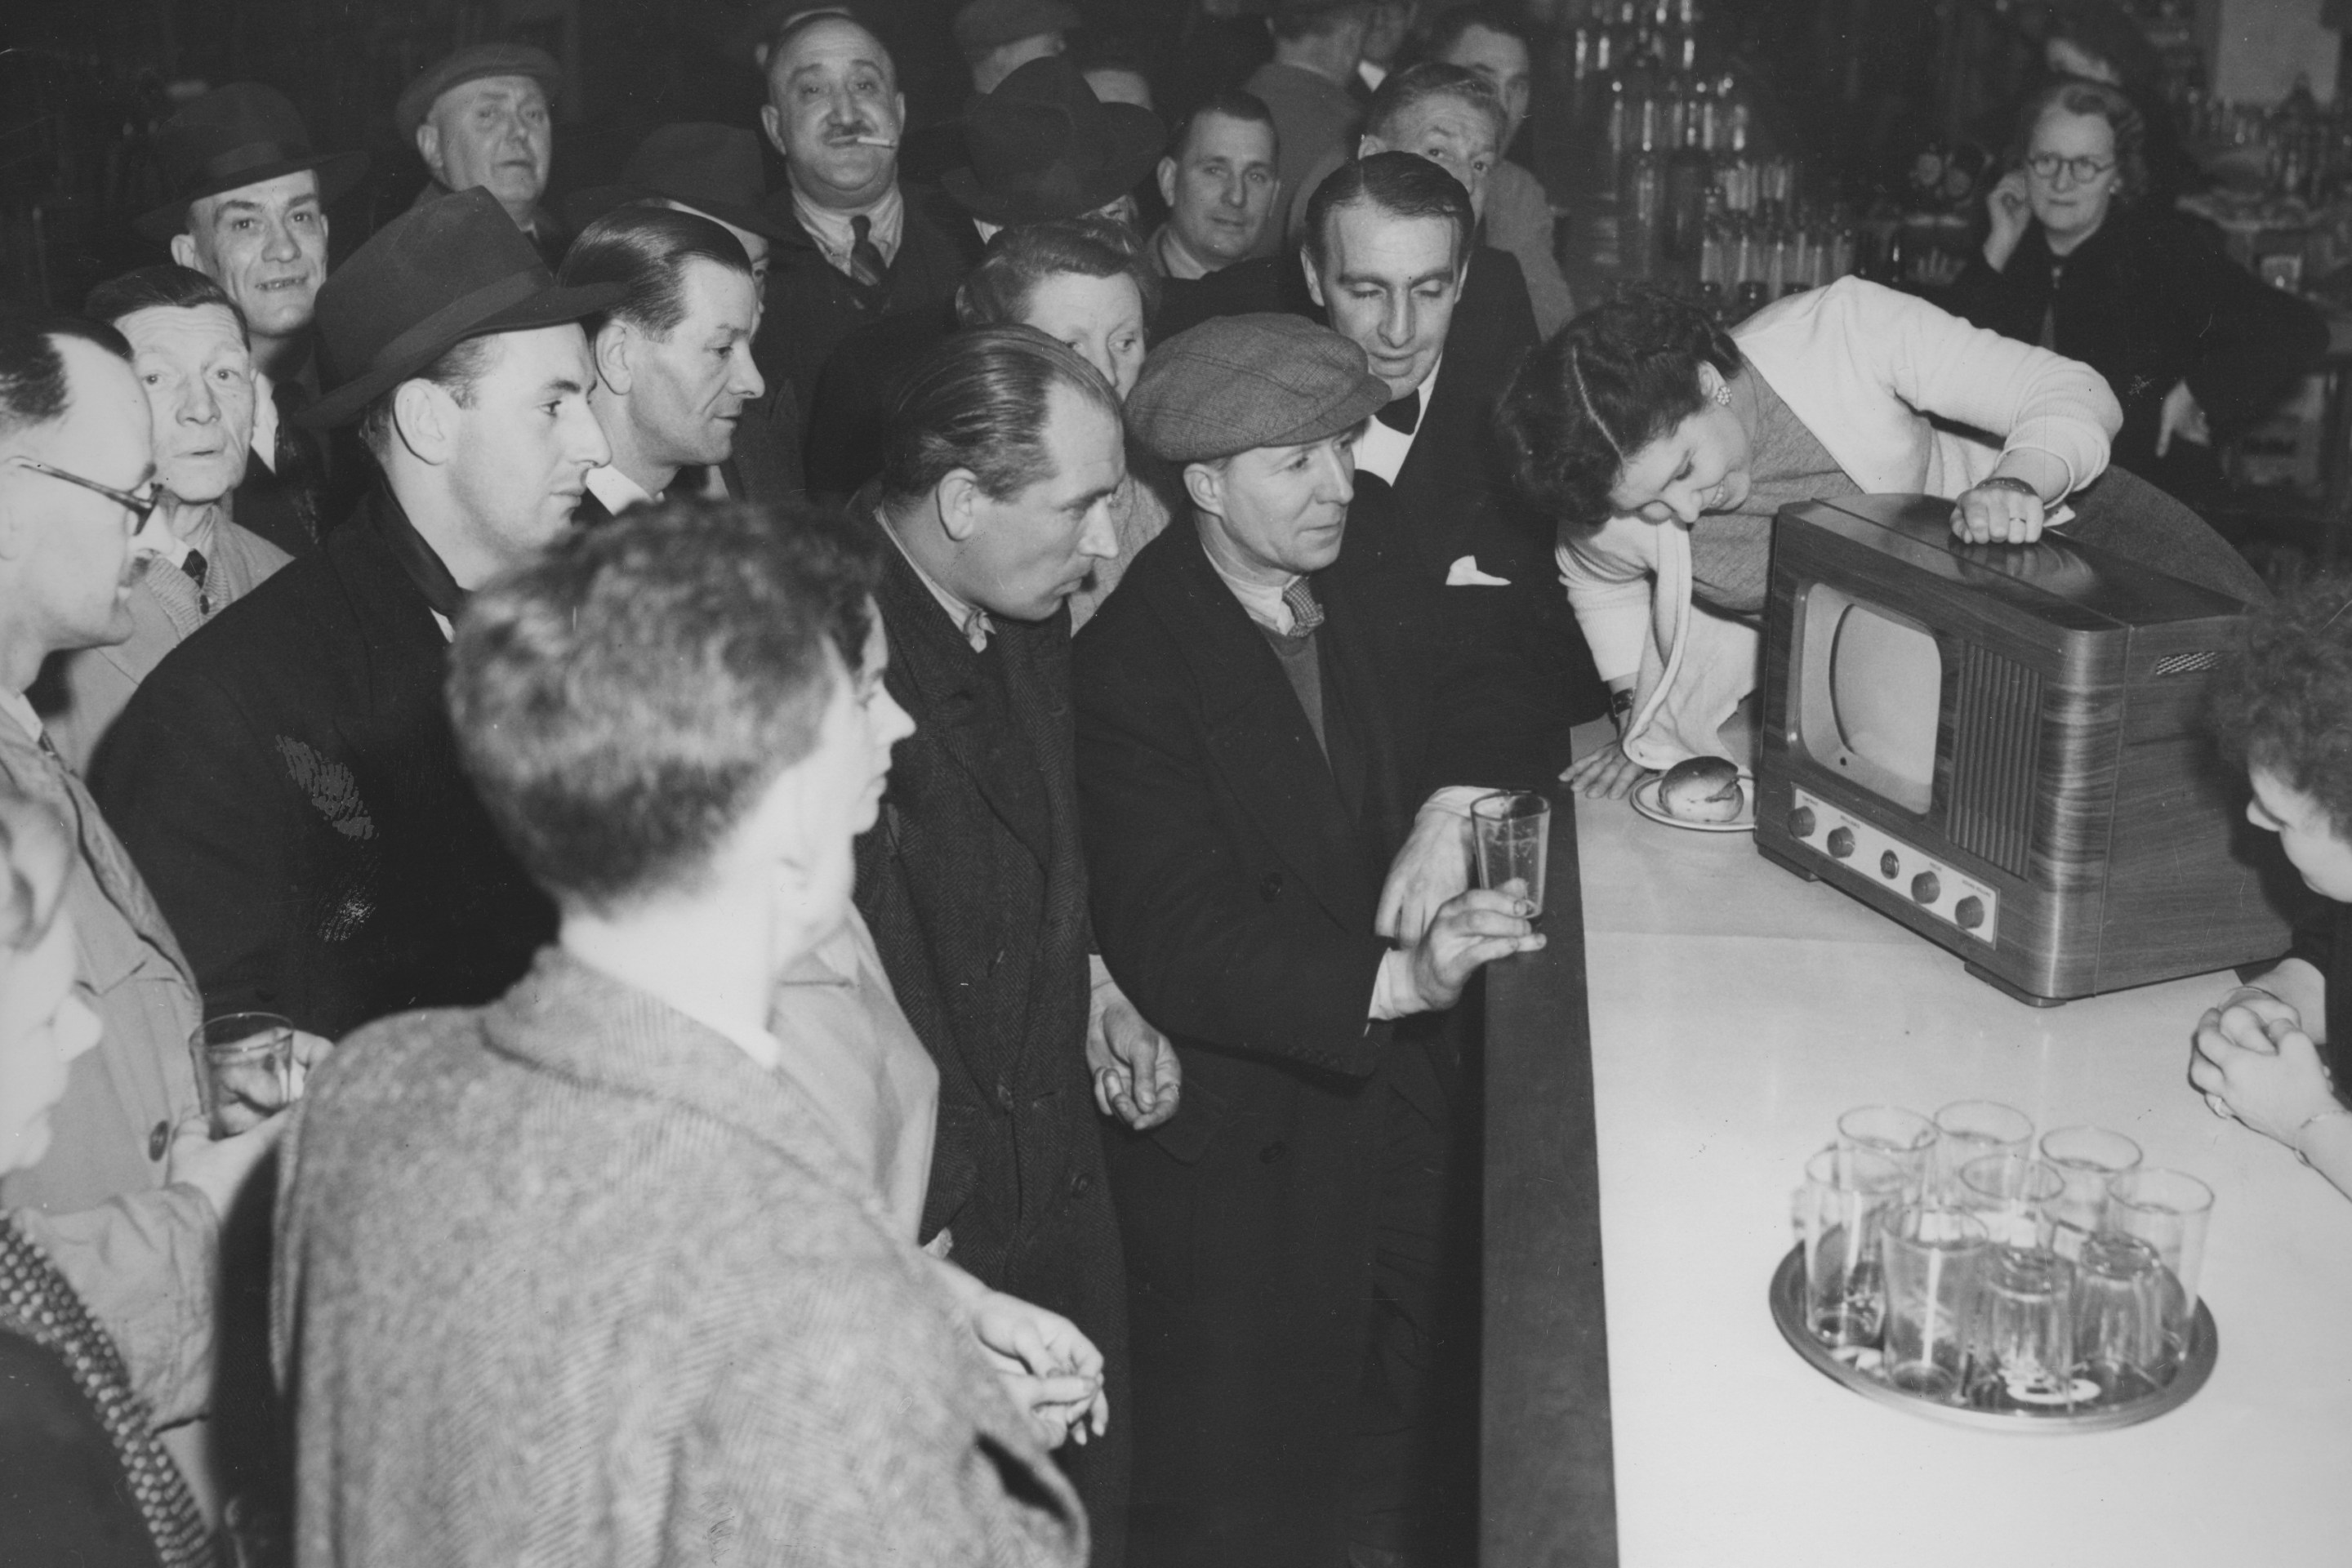 Boxing fans watch a televised fight between Albert Finch of Britain and Baby Day (Lewis Warren) of the USA, in a bar, UK, 7th February 1950. Day won on points.